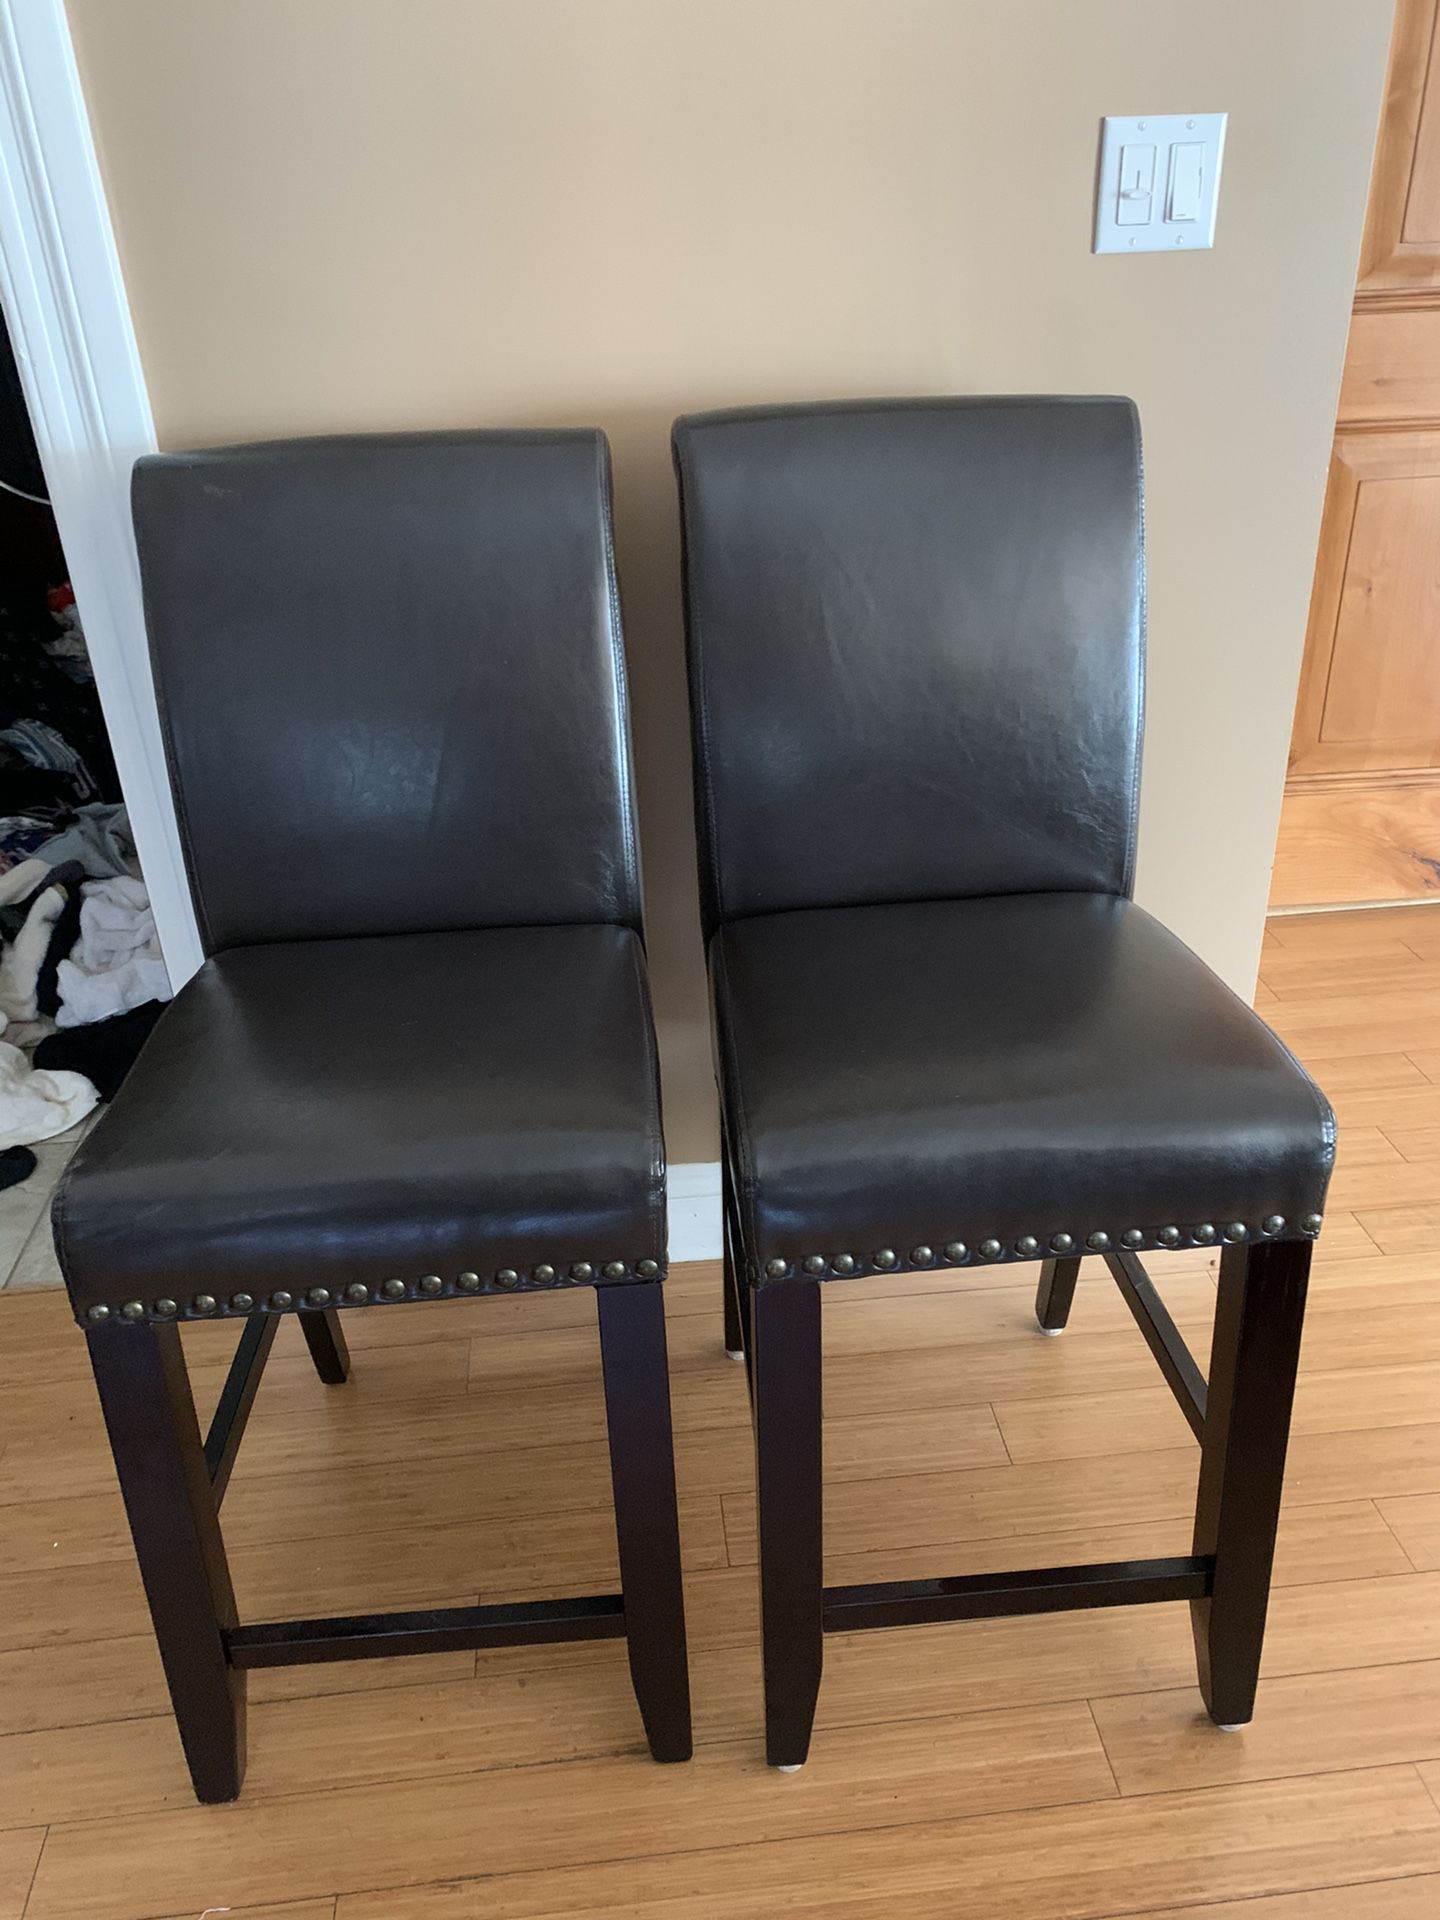 3 Fox Leather Bar Stools 25” inches $120 for all